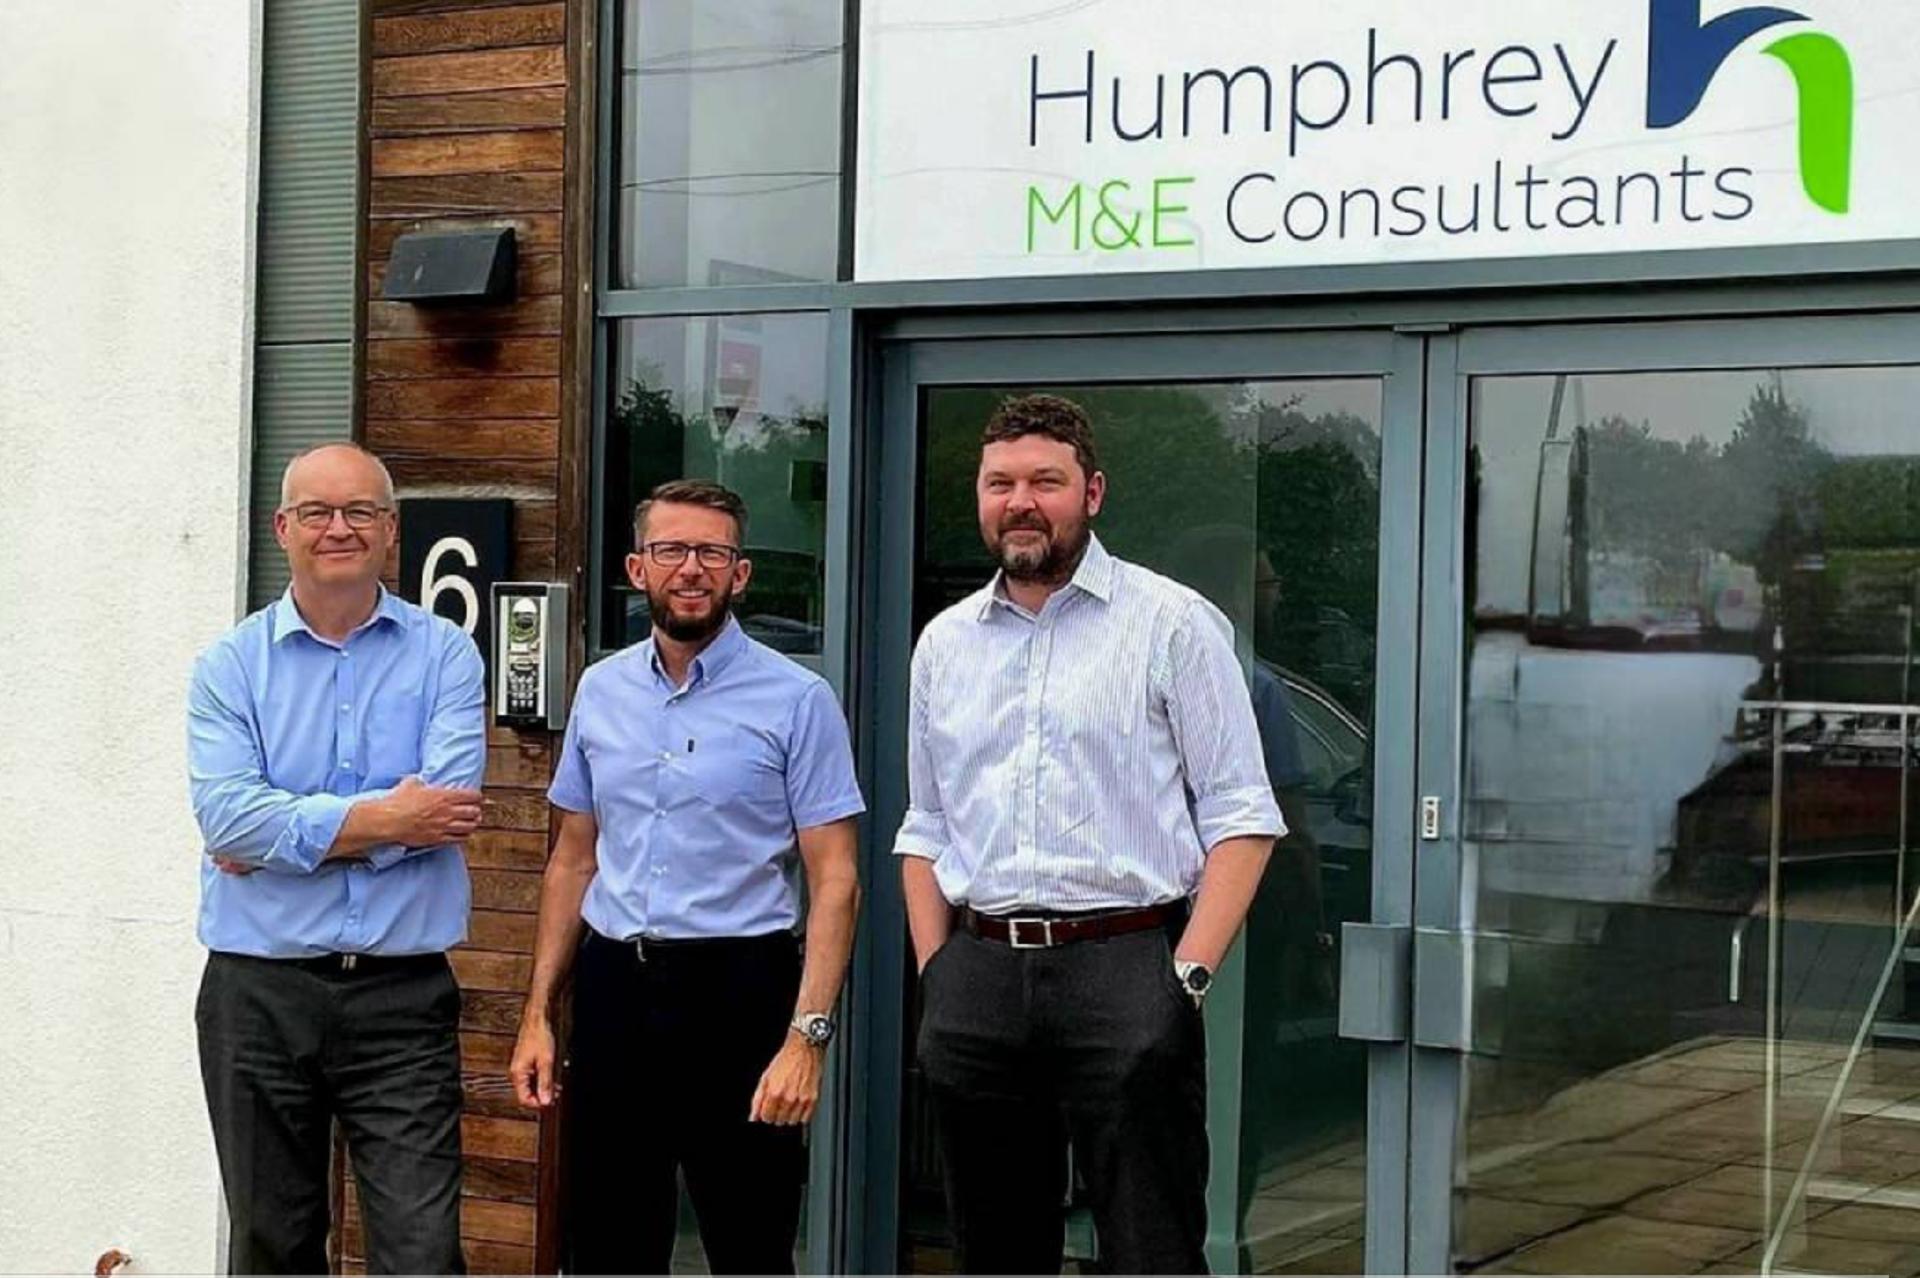 Building services consultancy moves to employee ownership